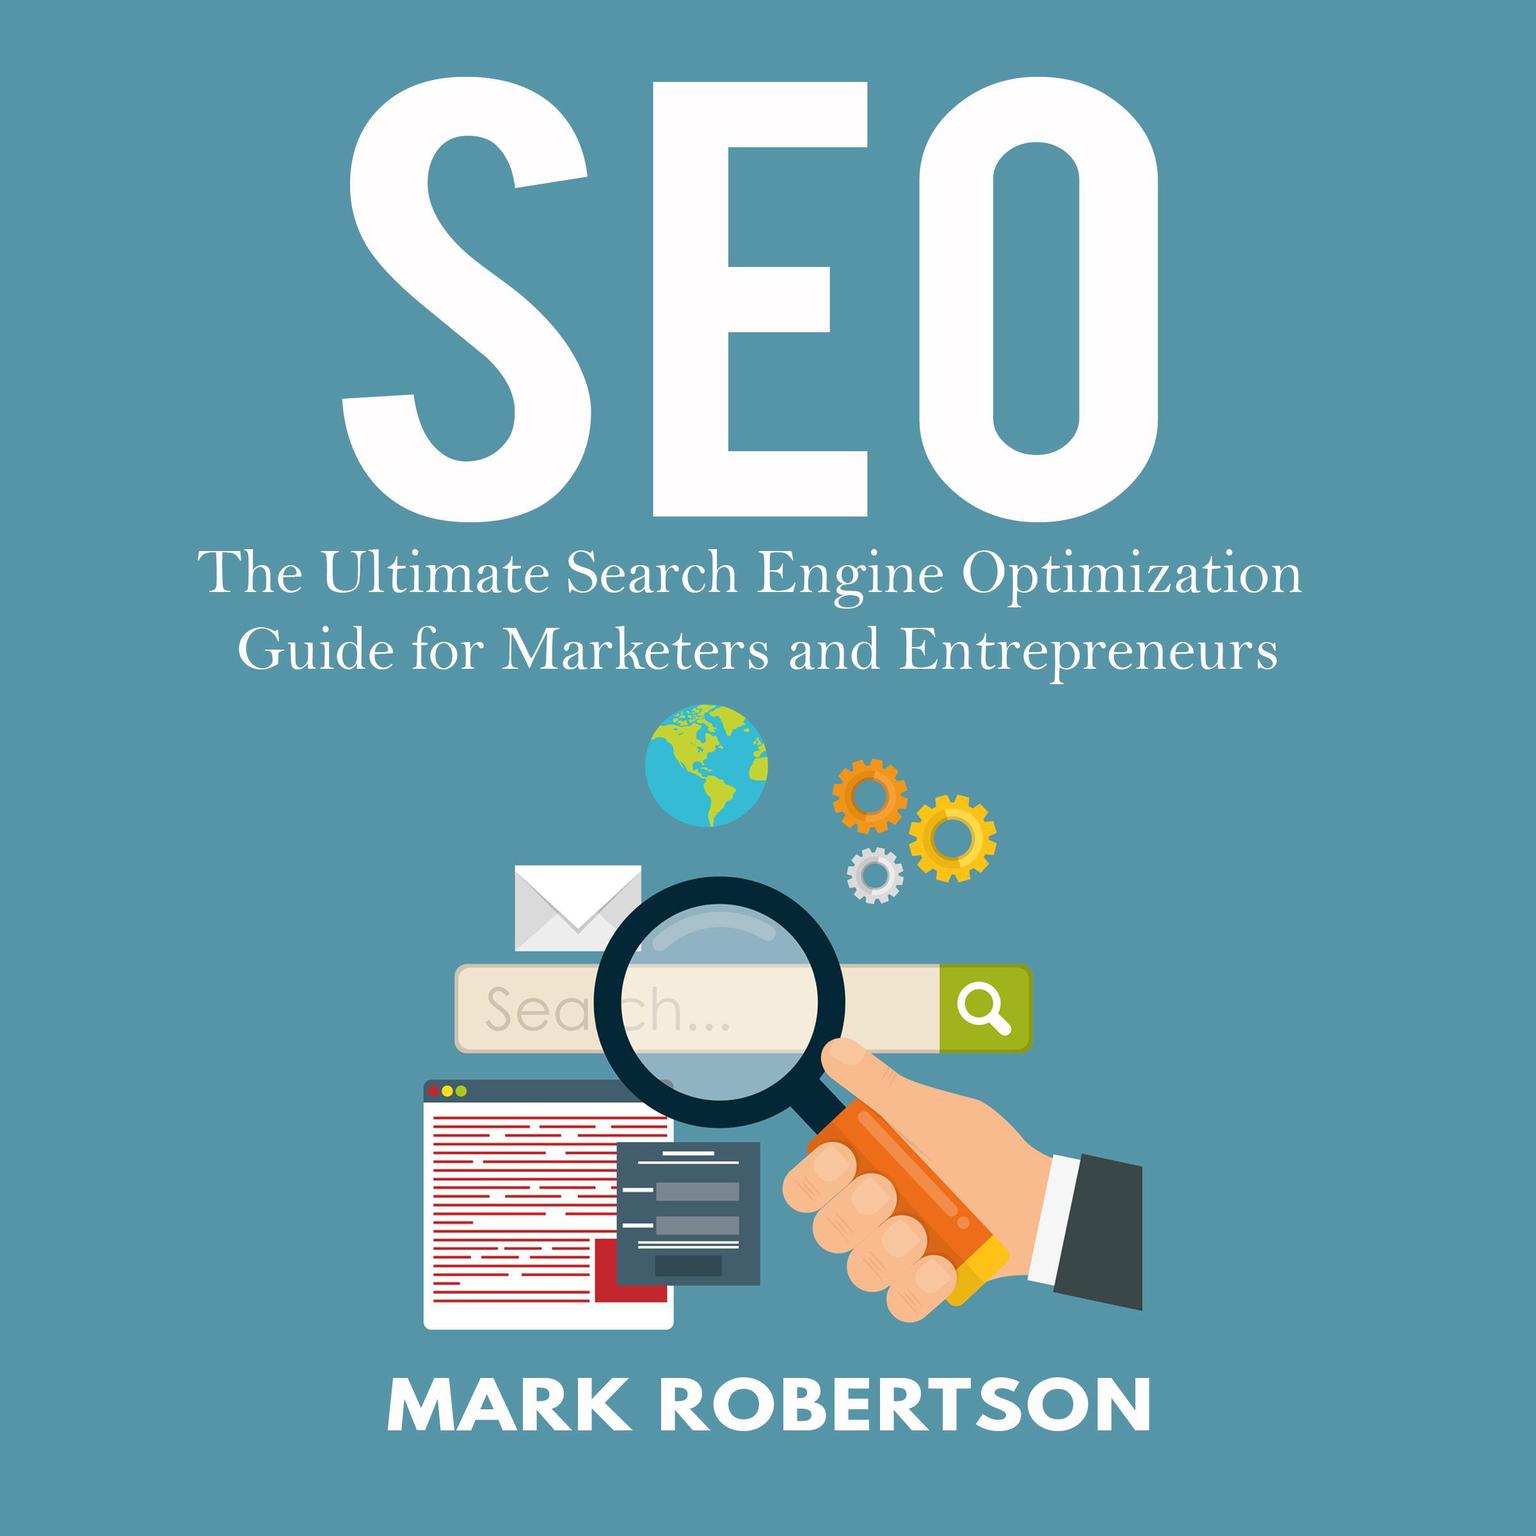 Seo: The Ultimate Search Engine Optimization Guide for Marketers and Entrepreneurs Audiobook, by Mark Robertson